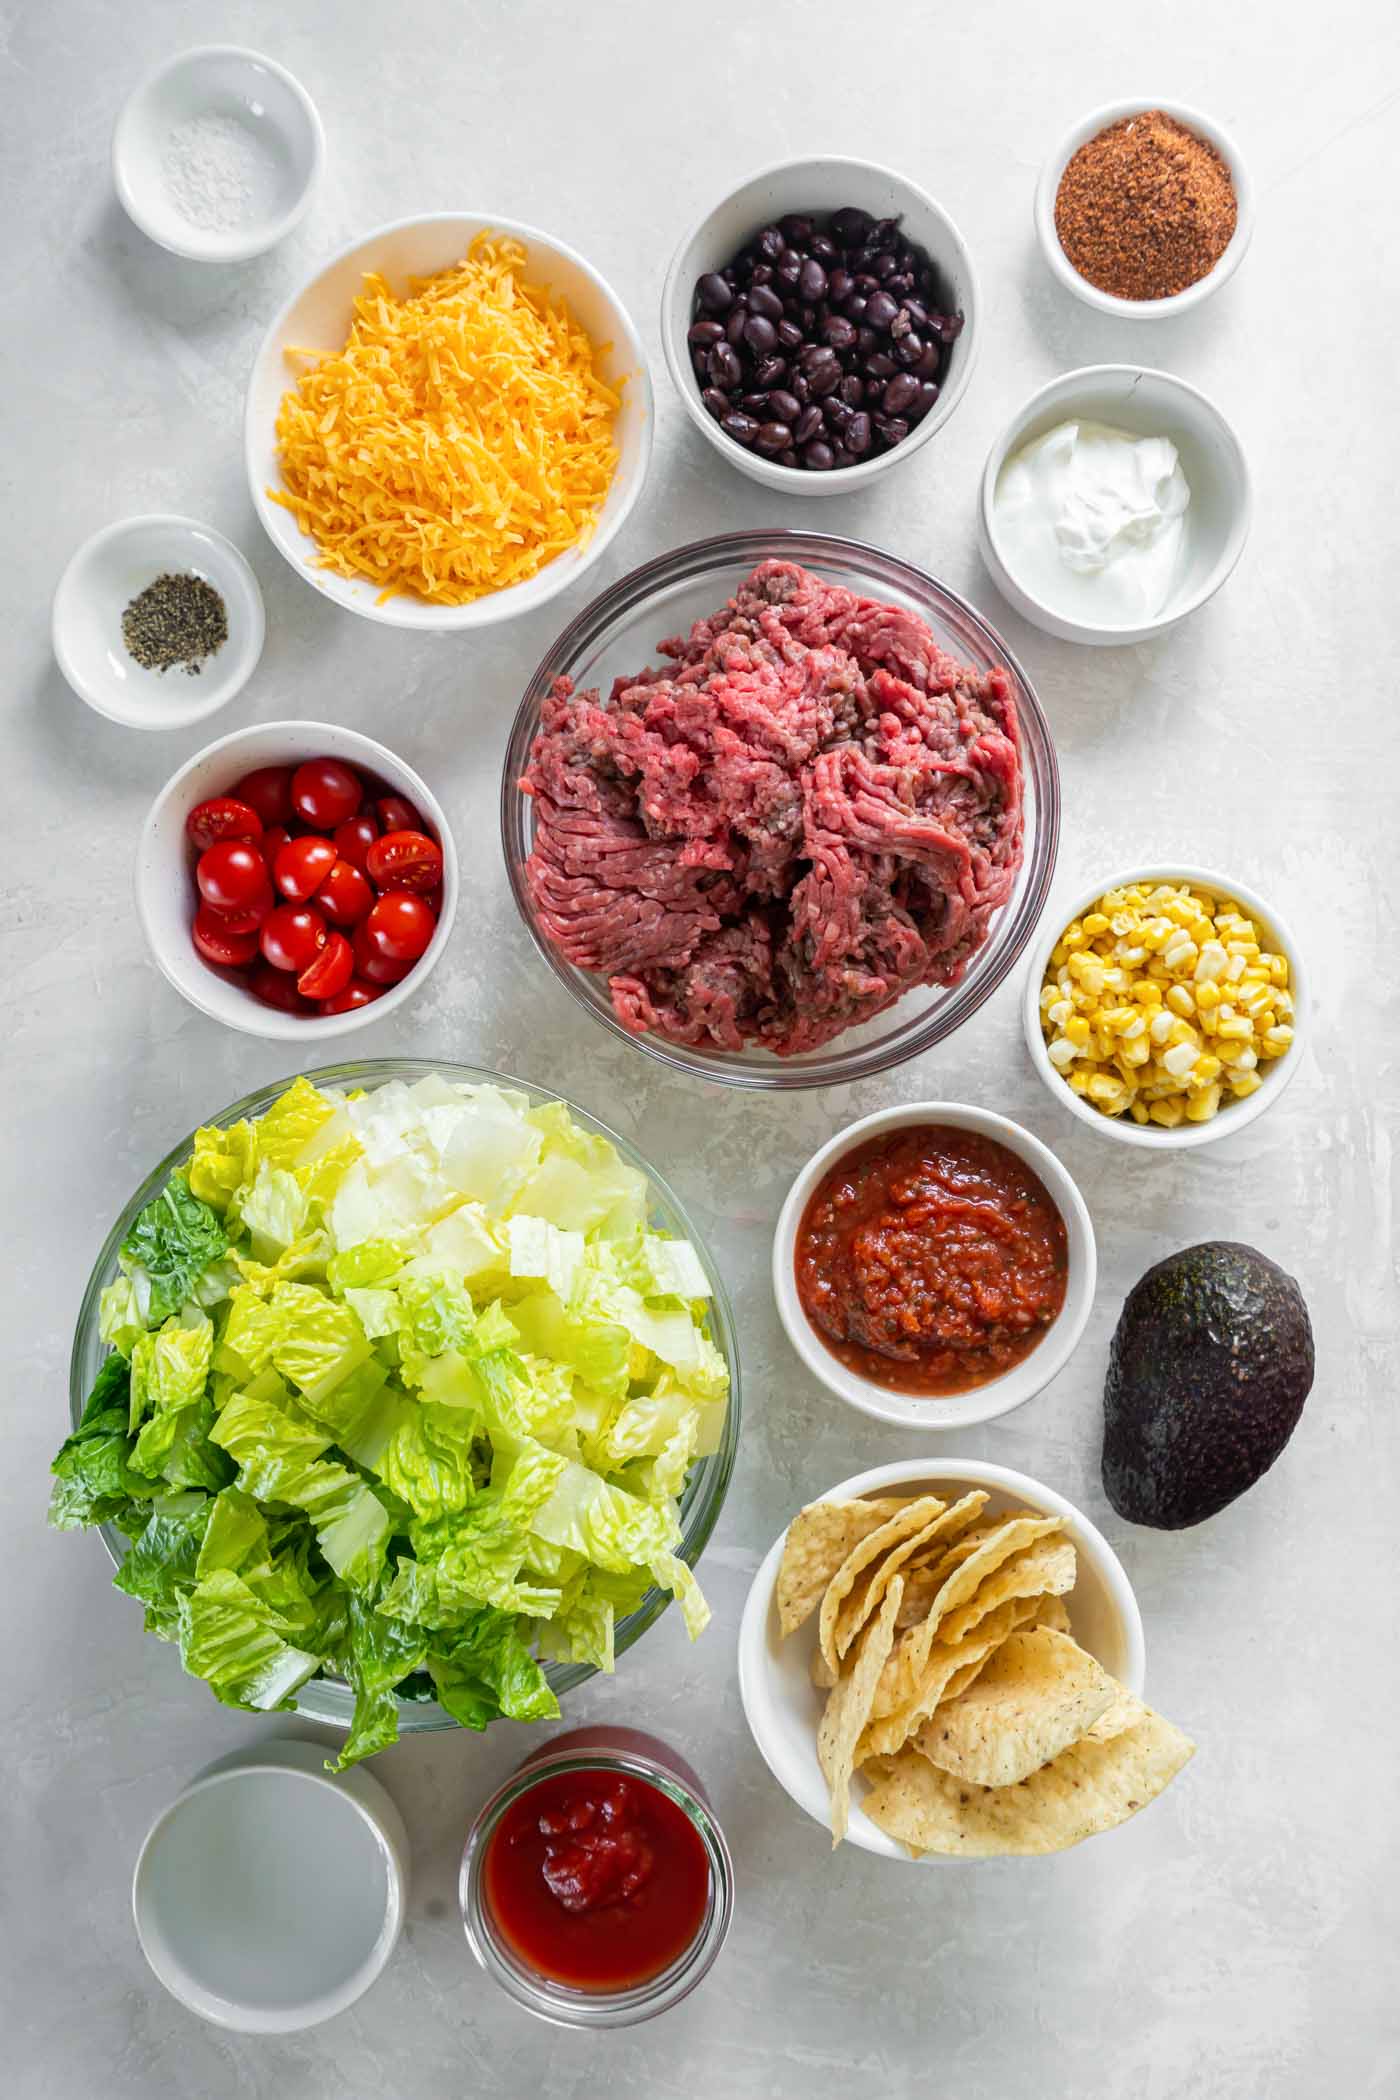 Ingredients for taco salad recipe.